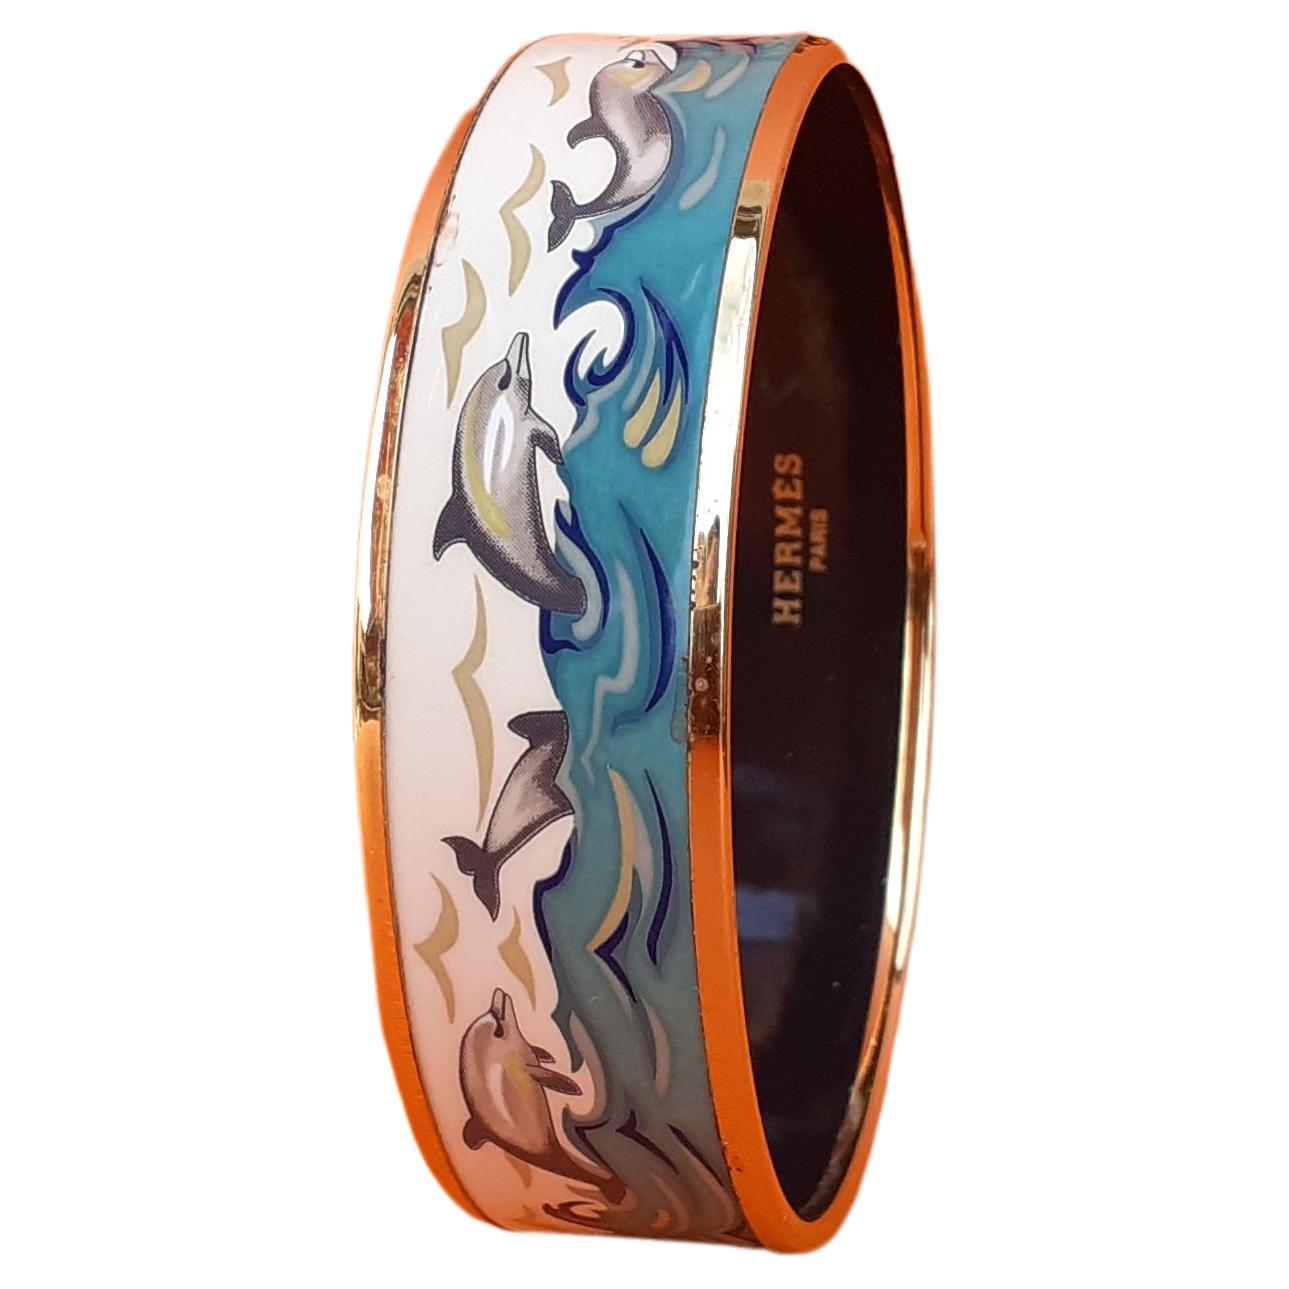 Beautiful Authentic Hermès Bracelet

Pattern: Dolphins in See

RARE bracelet, hard to find with golden hardware !

Made in Austria + C (1999)

Made of Enamel and Yellow Gold Plated Hardware

Colorways: Cream / Blue / Grey

